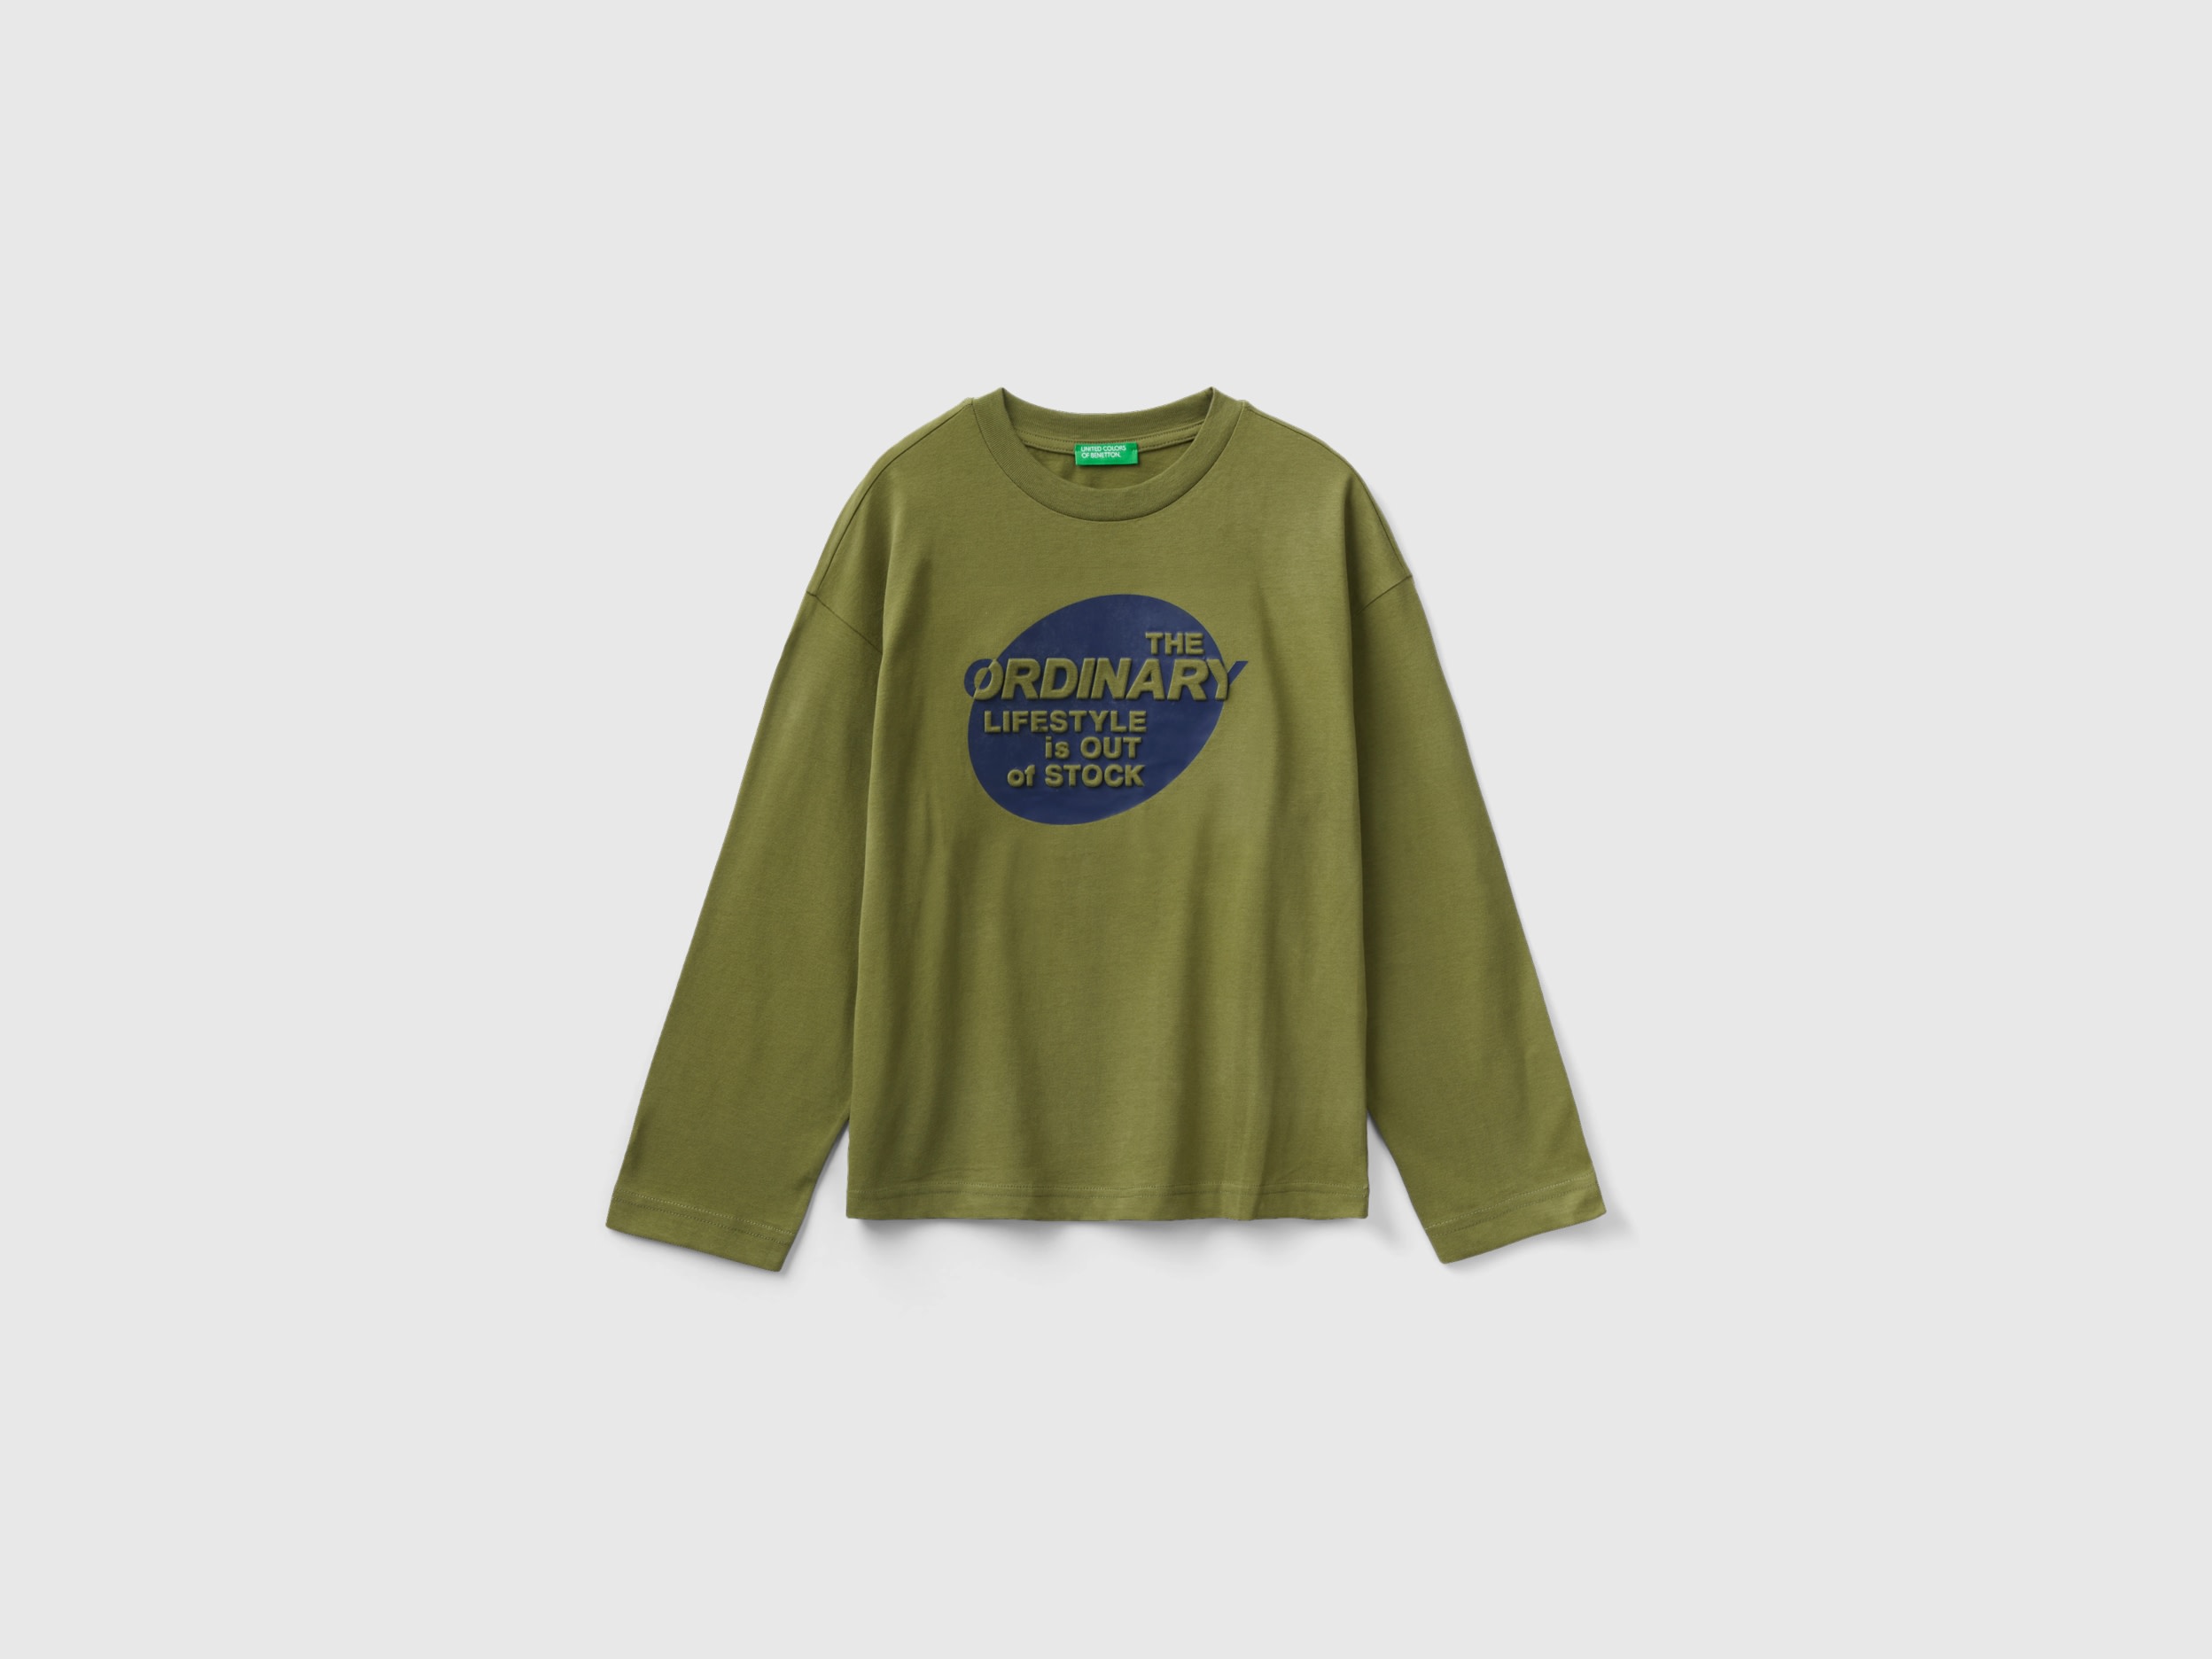 Benetton, T-shirt In Warm Cotton With Print, size 3XL, Military Green, Kids